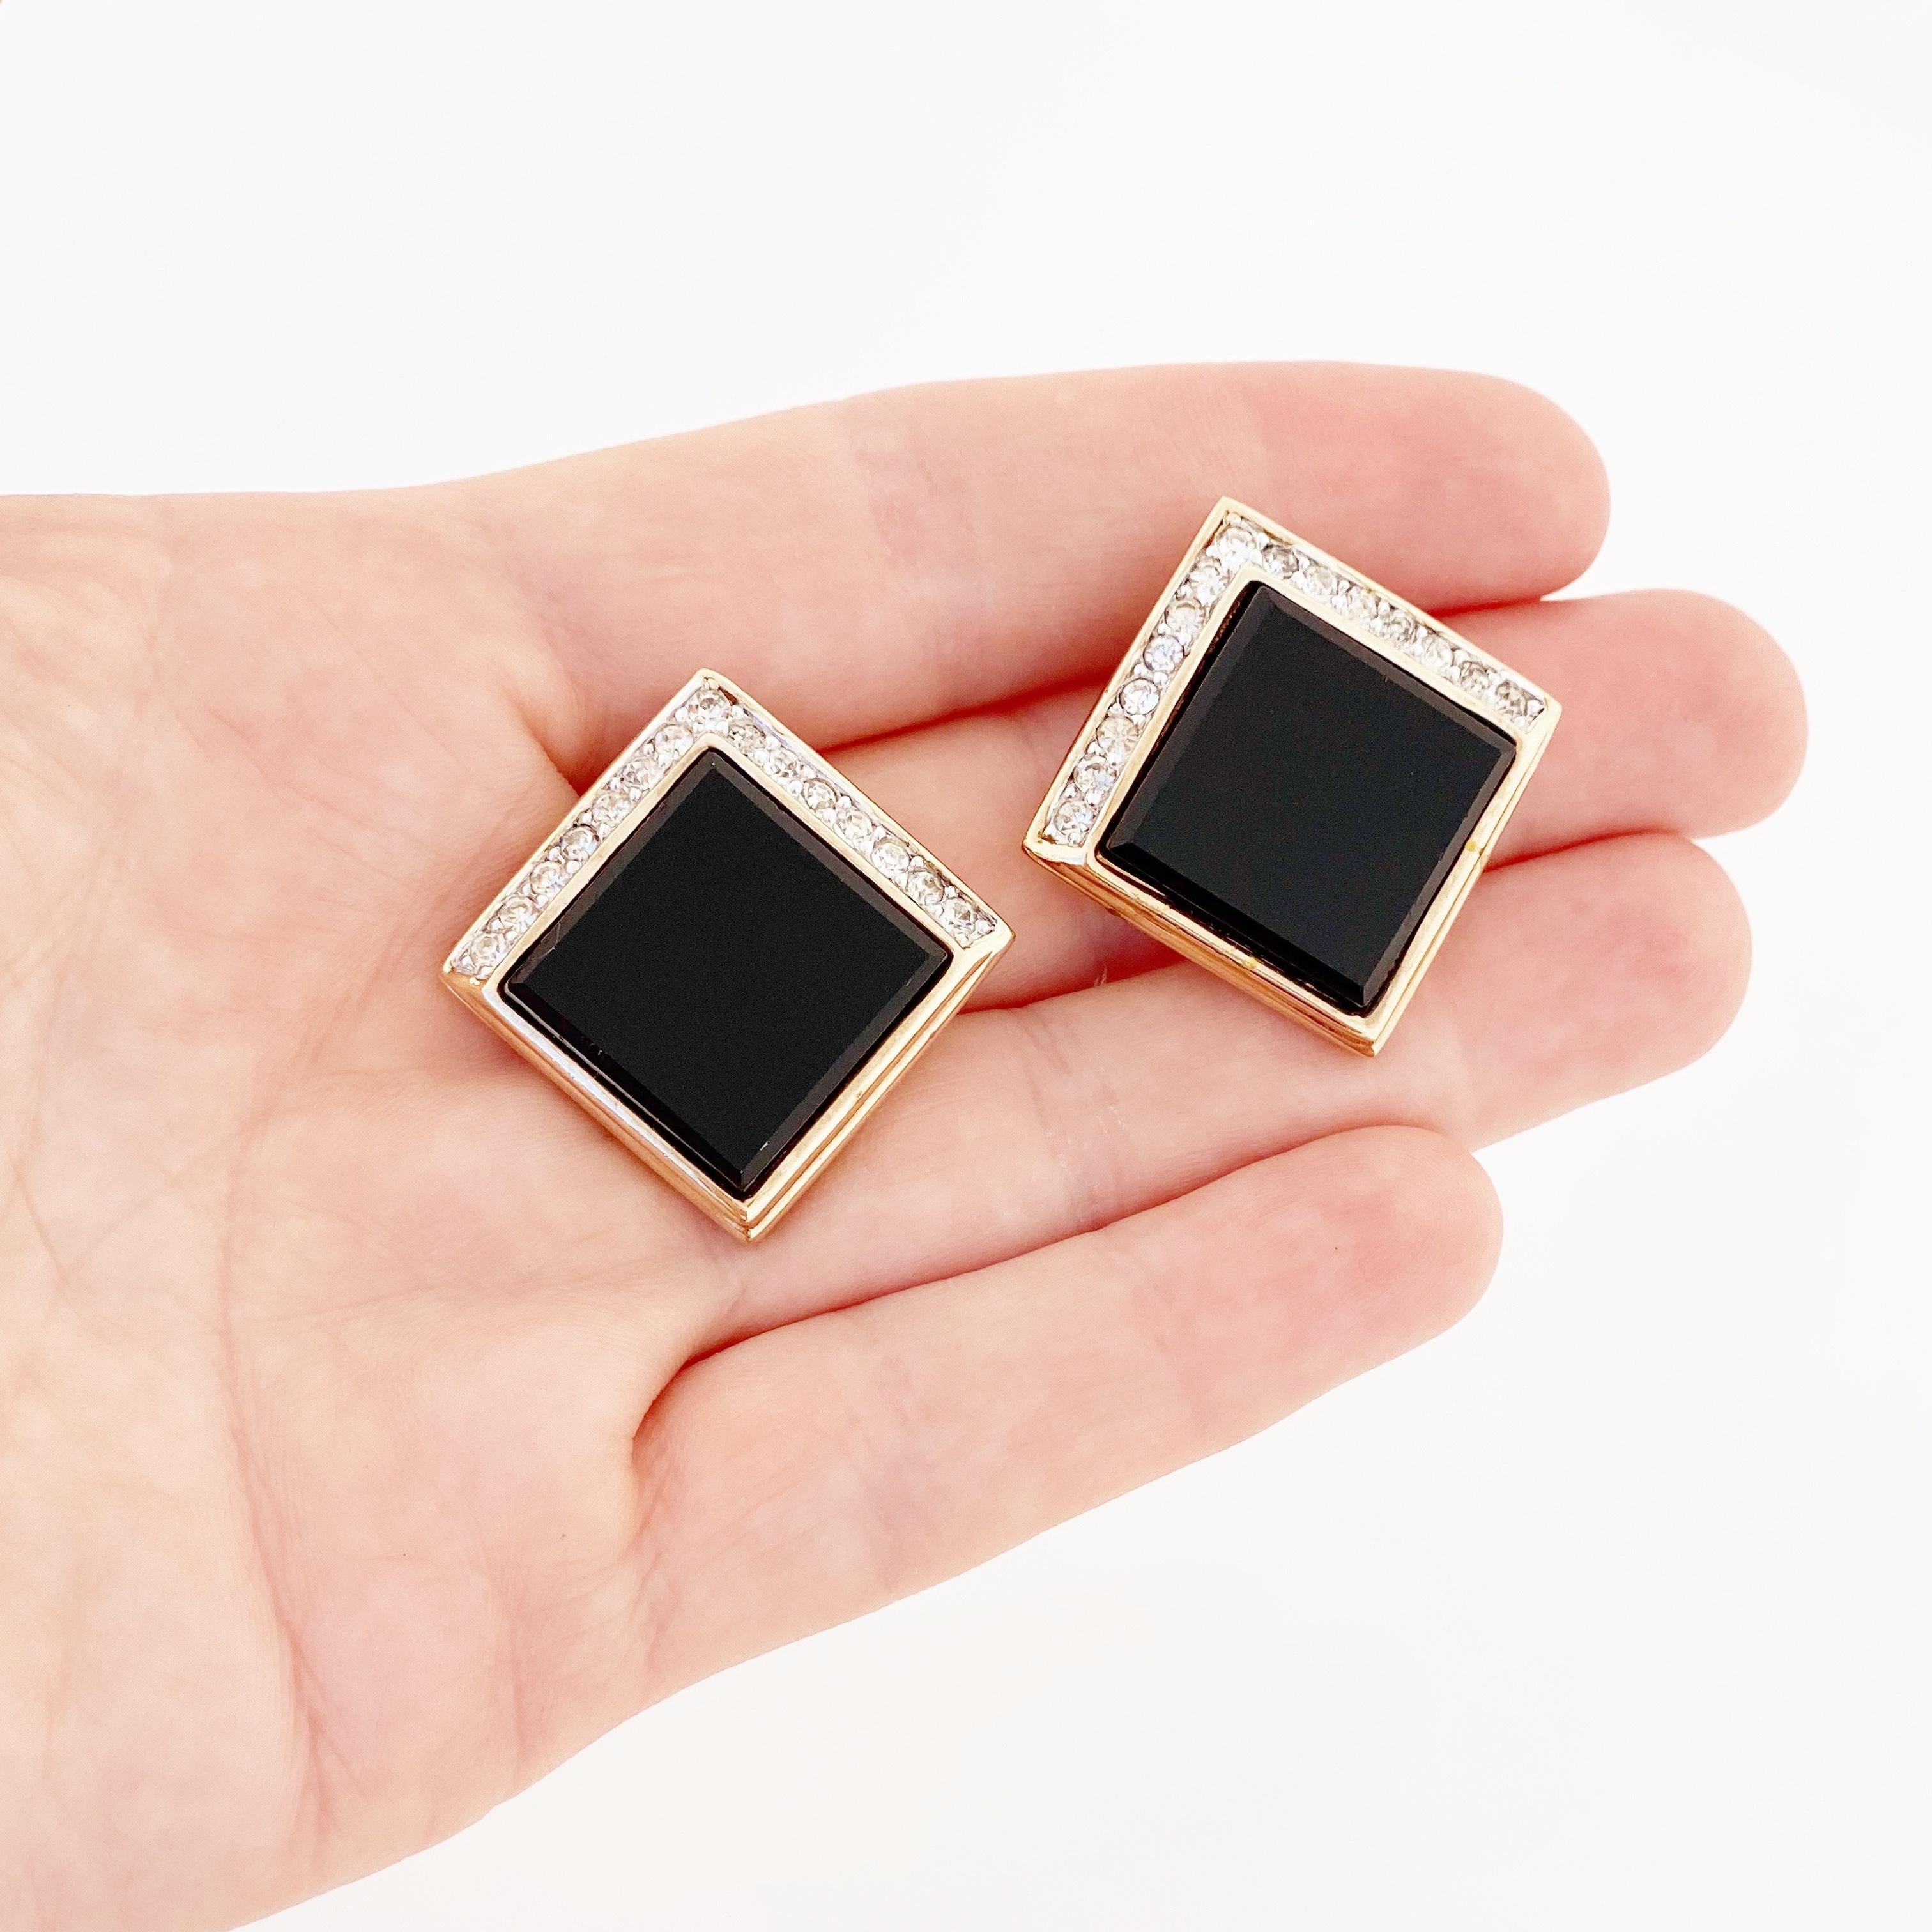 Modern Onyx Square Earrings With Crystal Rhinestone Accents By Panetta, 1970s